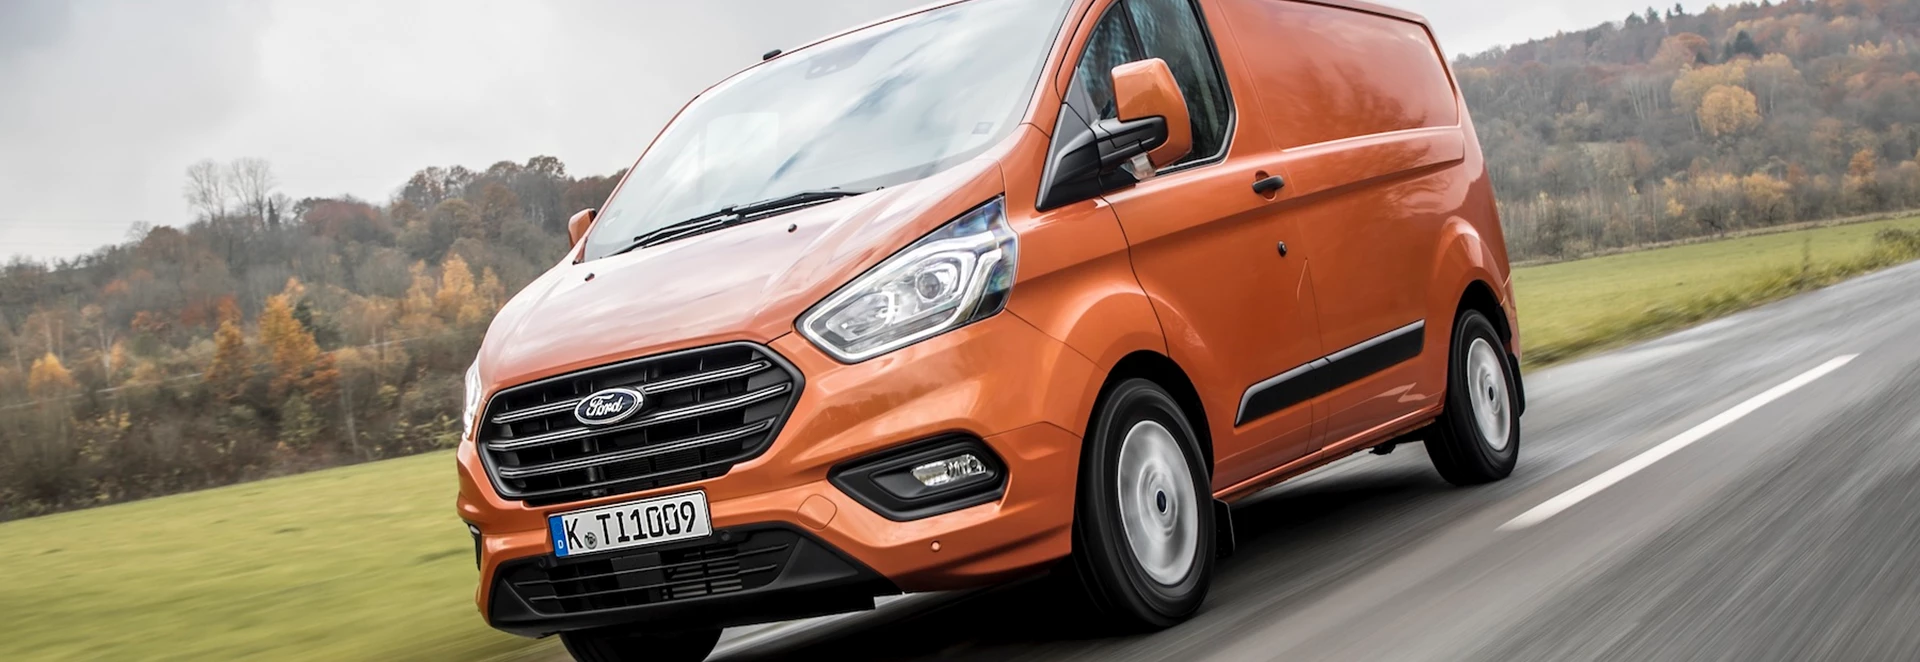 Ford Commercial finance and lease offers in 2020. What’s available?